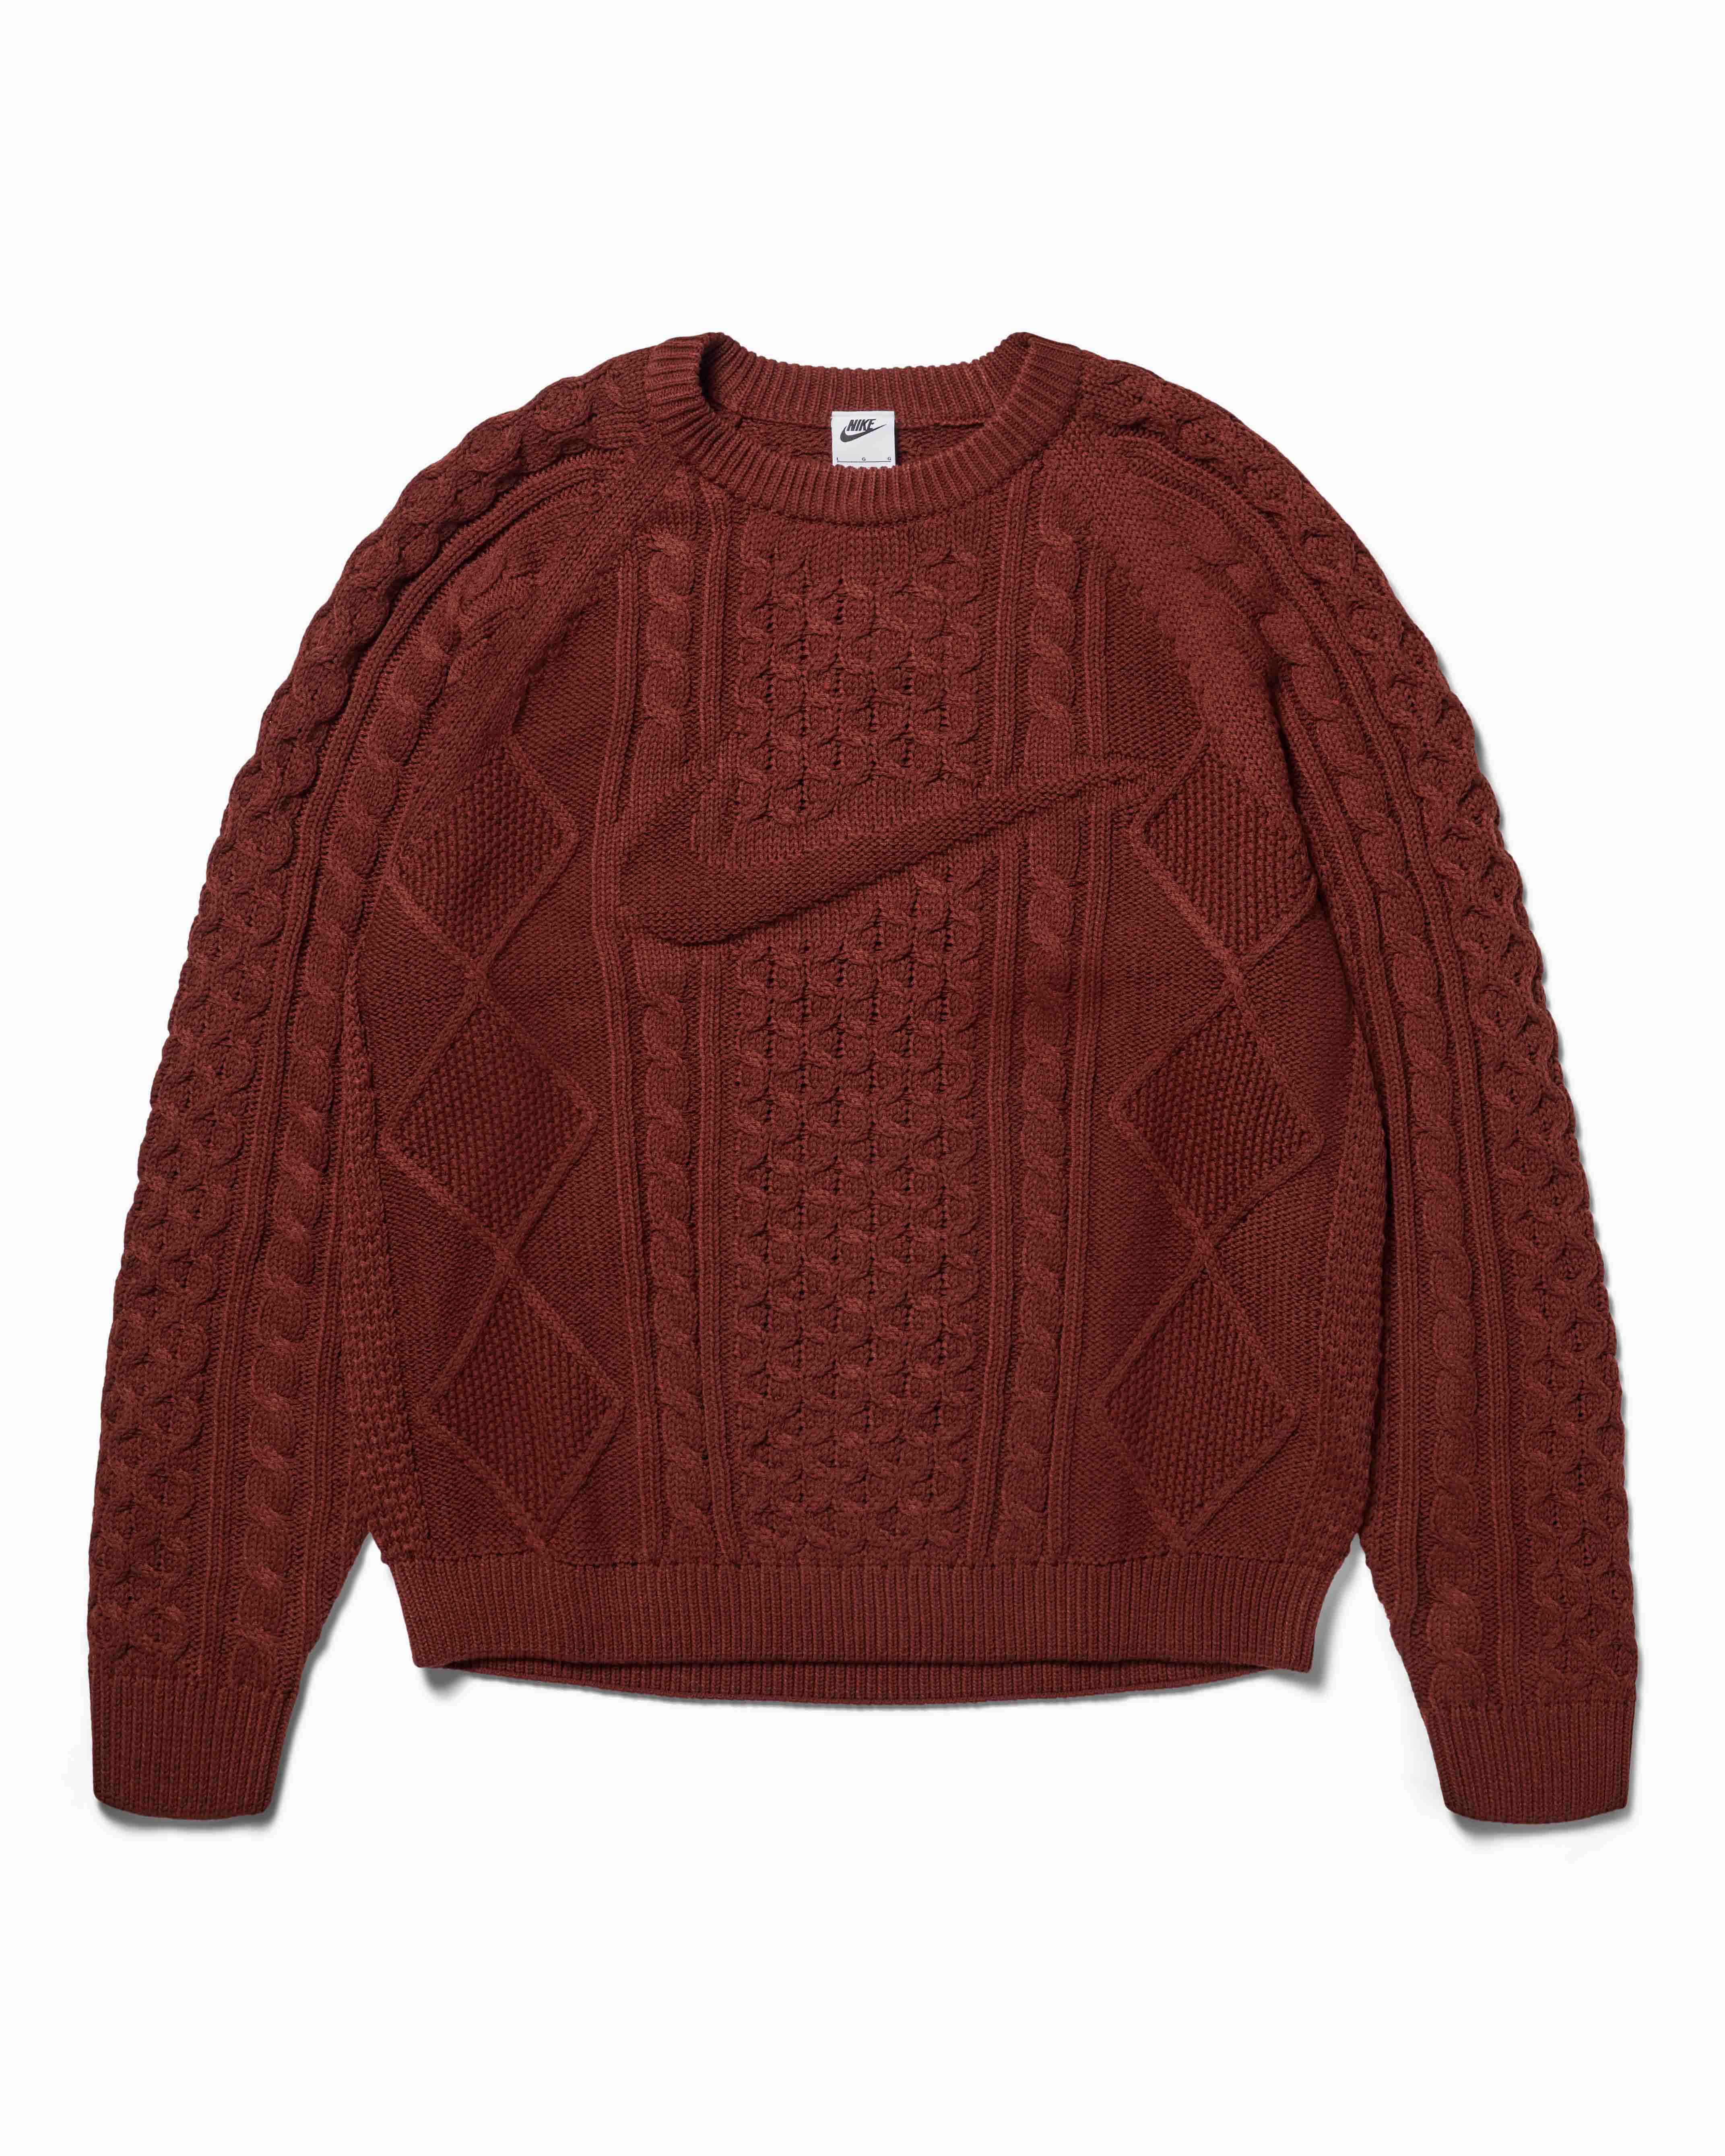 Cable-Knit Sweater Nike Tops Knitwear Brown